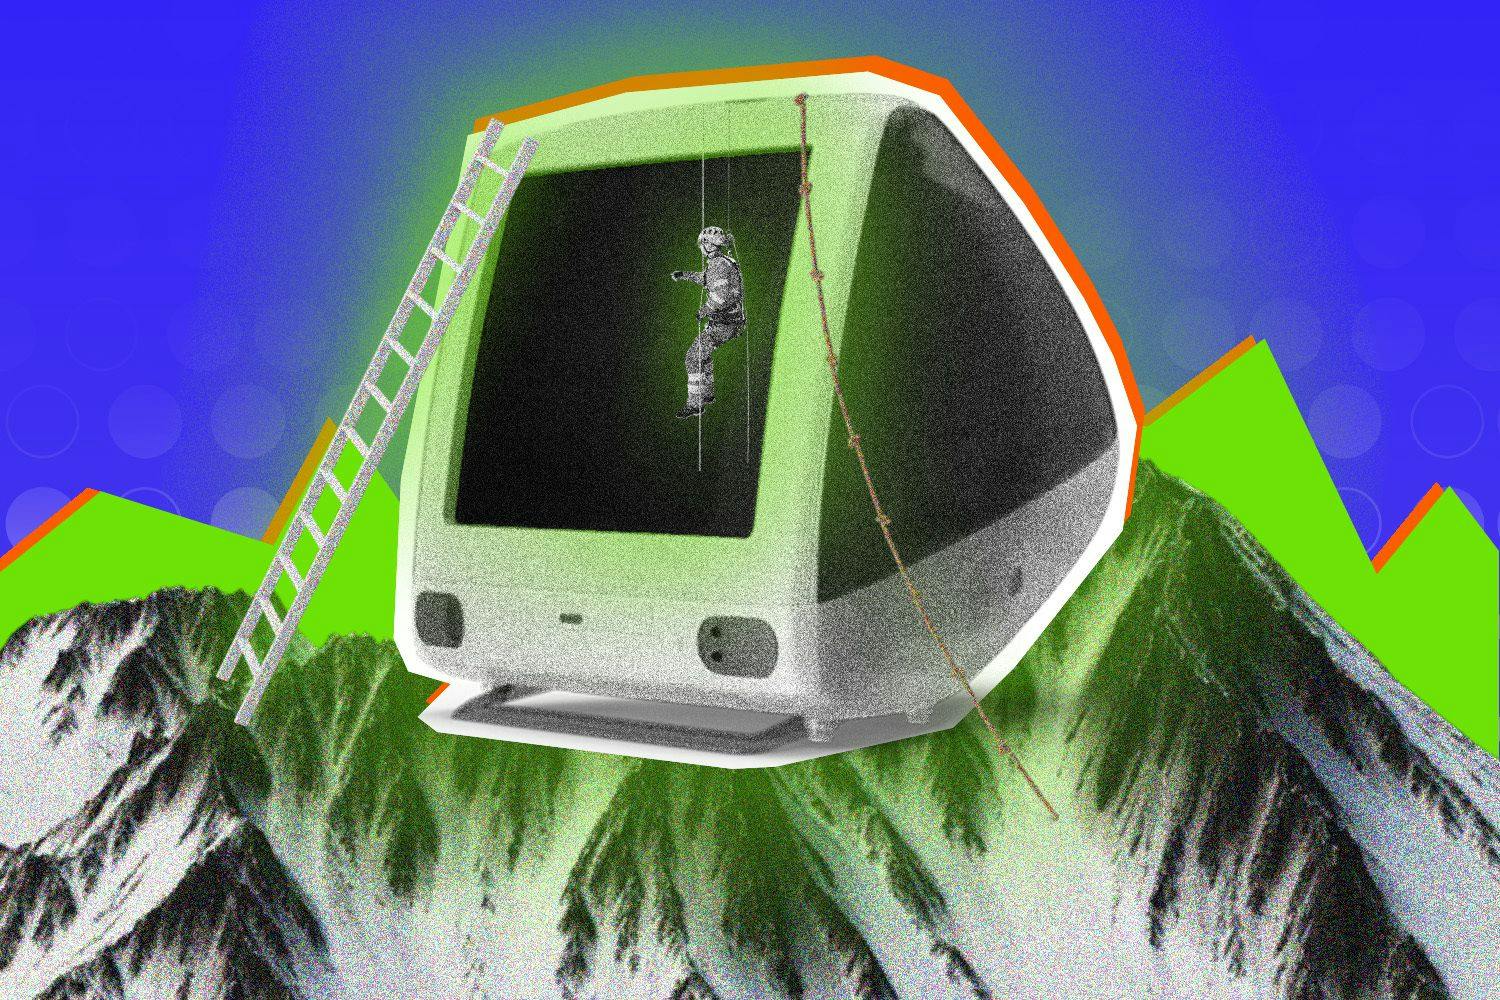 image of old pC overlaid on mountains